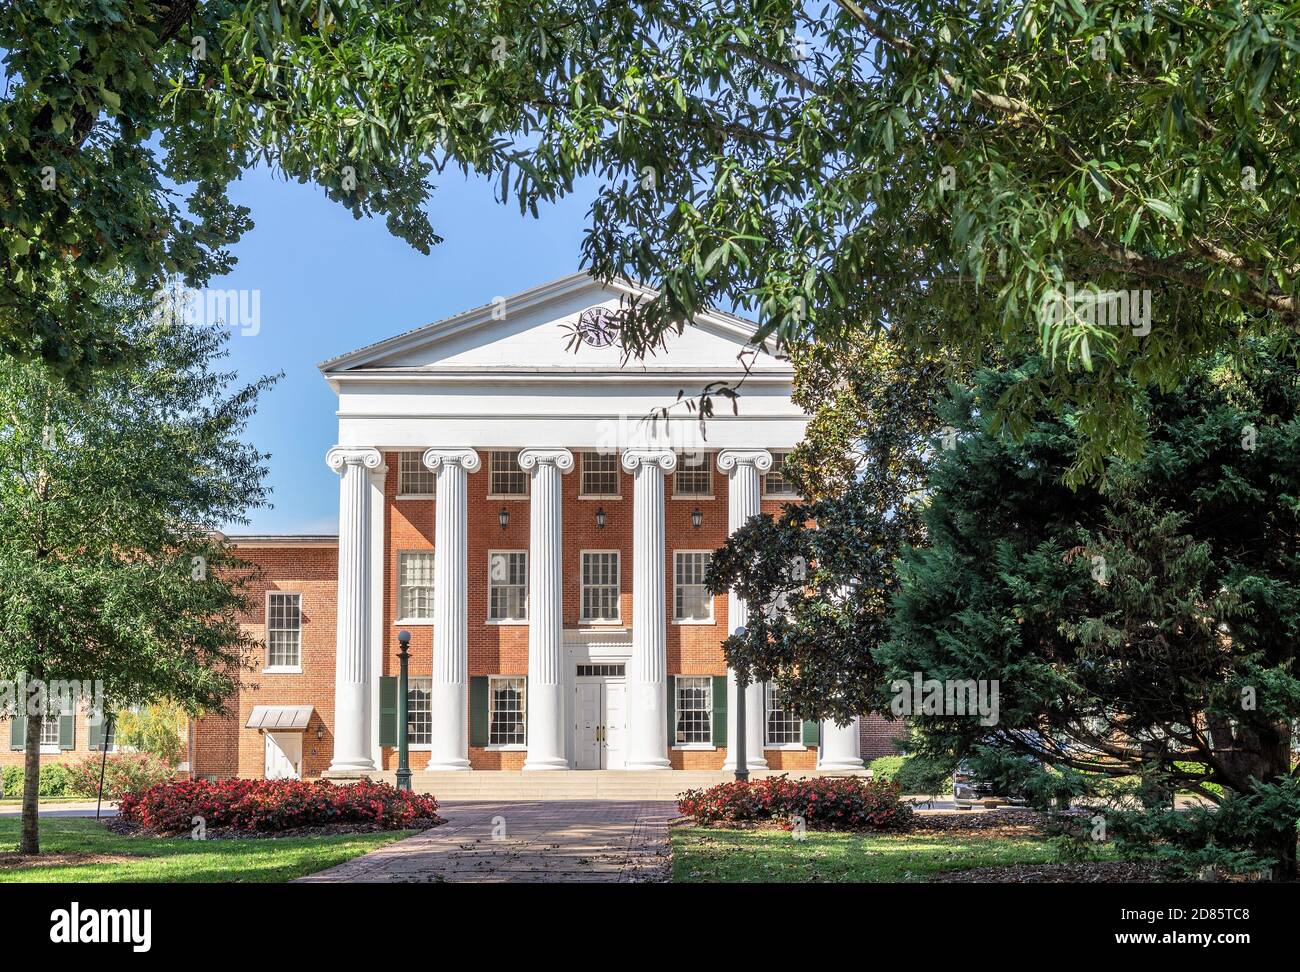 University of Mississippi Lyceum at Ole Miss completed in 1848 and used as a Civil War Hospital, Oxford, Mississippi, USA Stock Photo